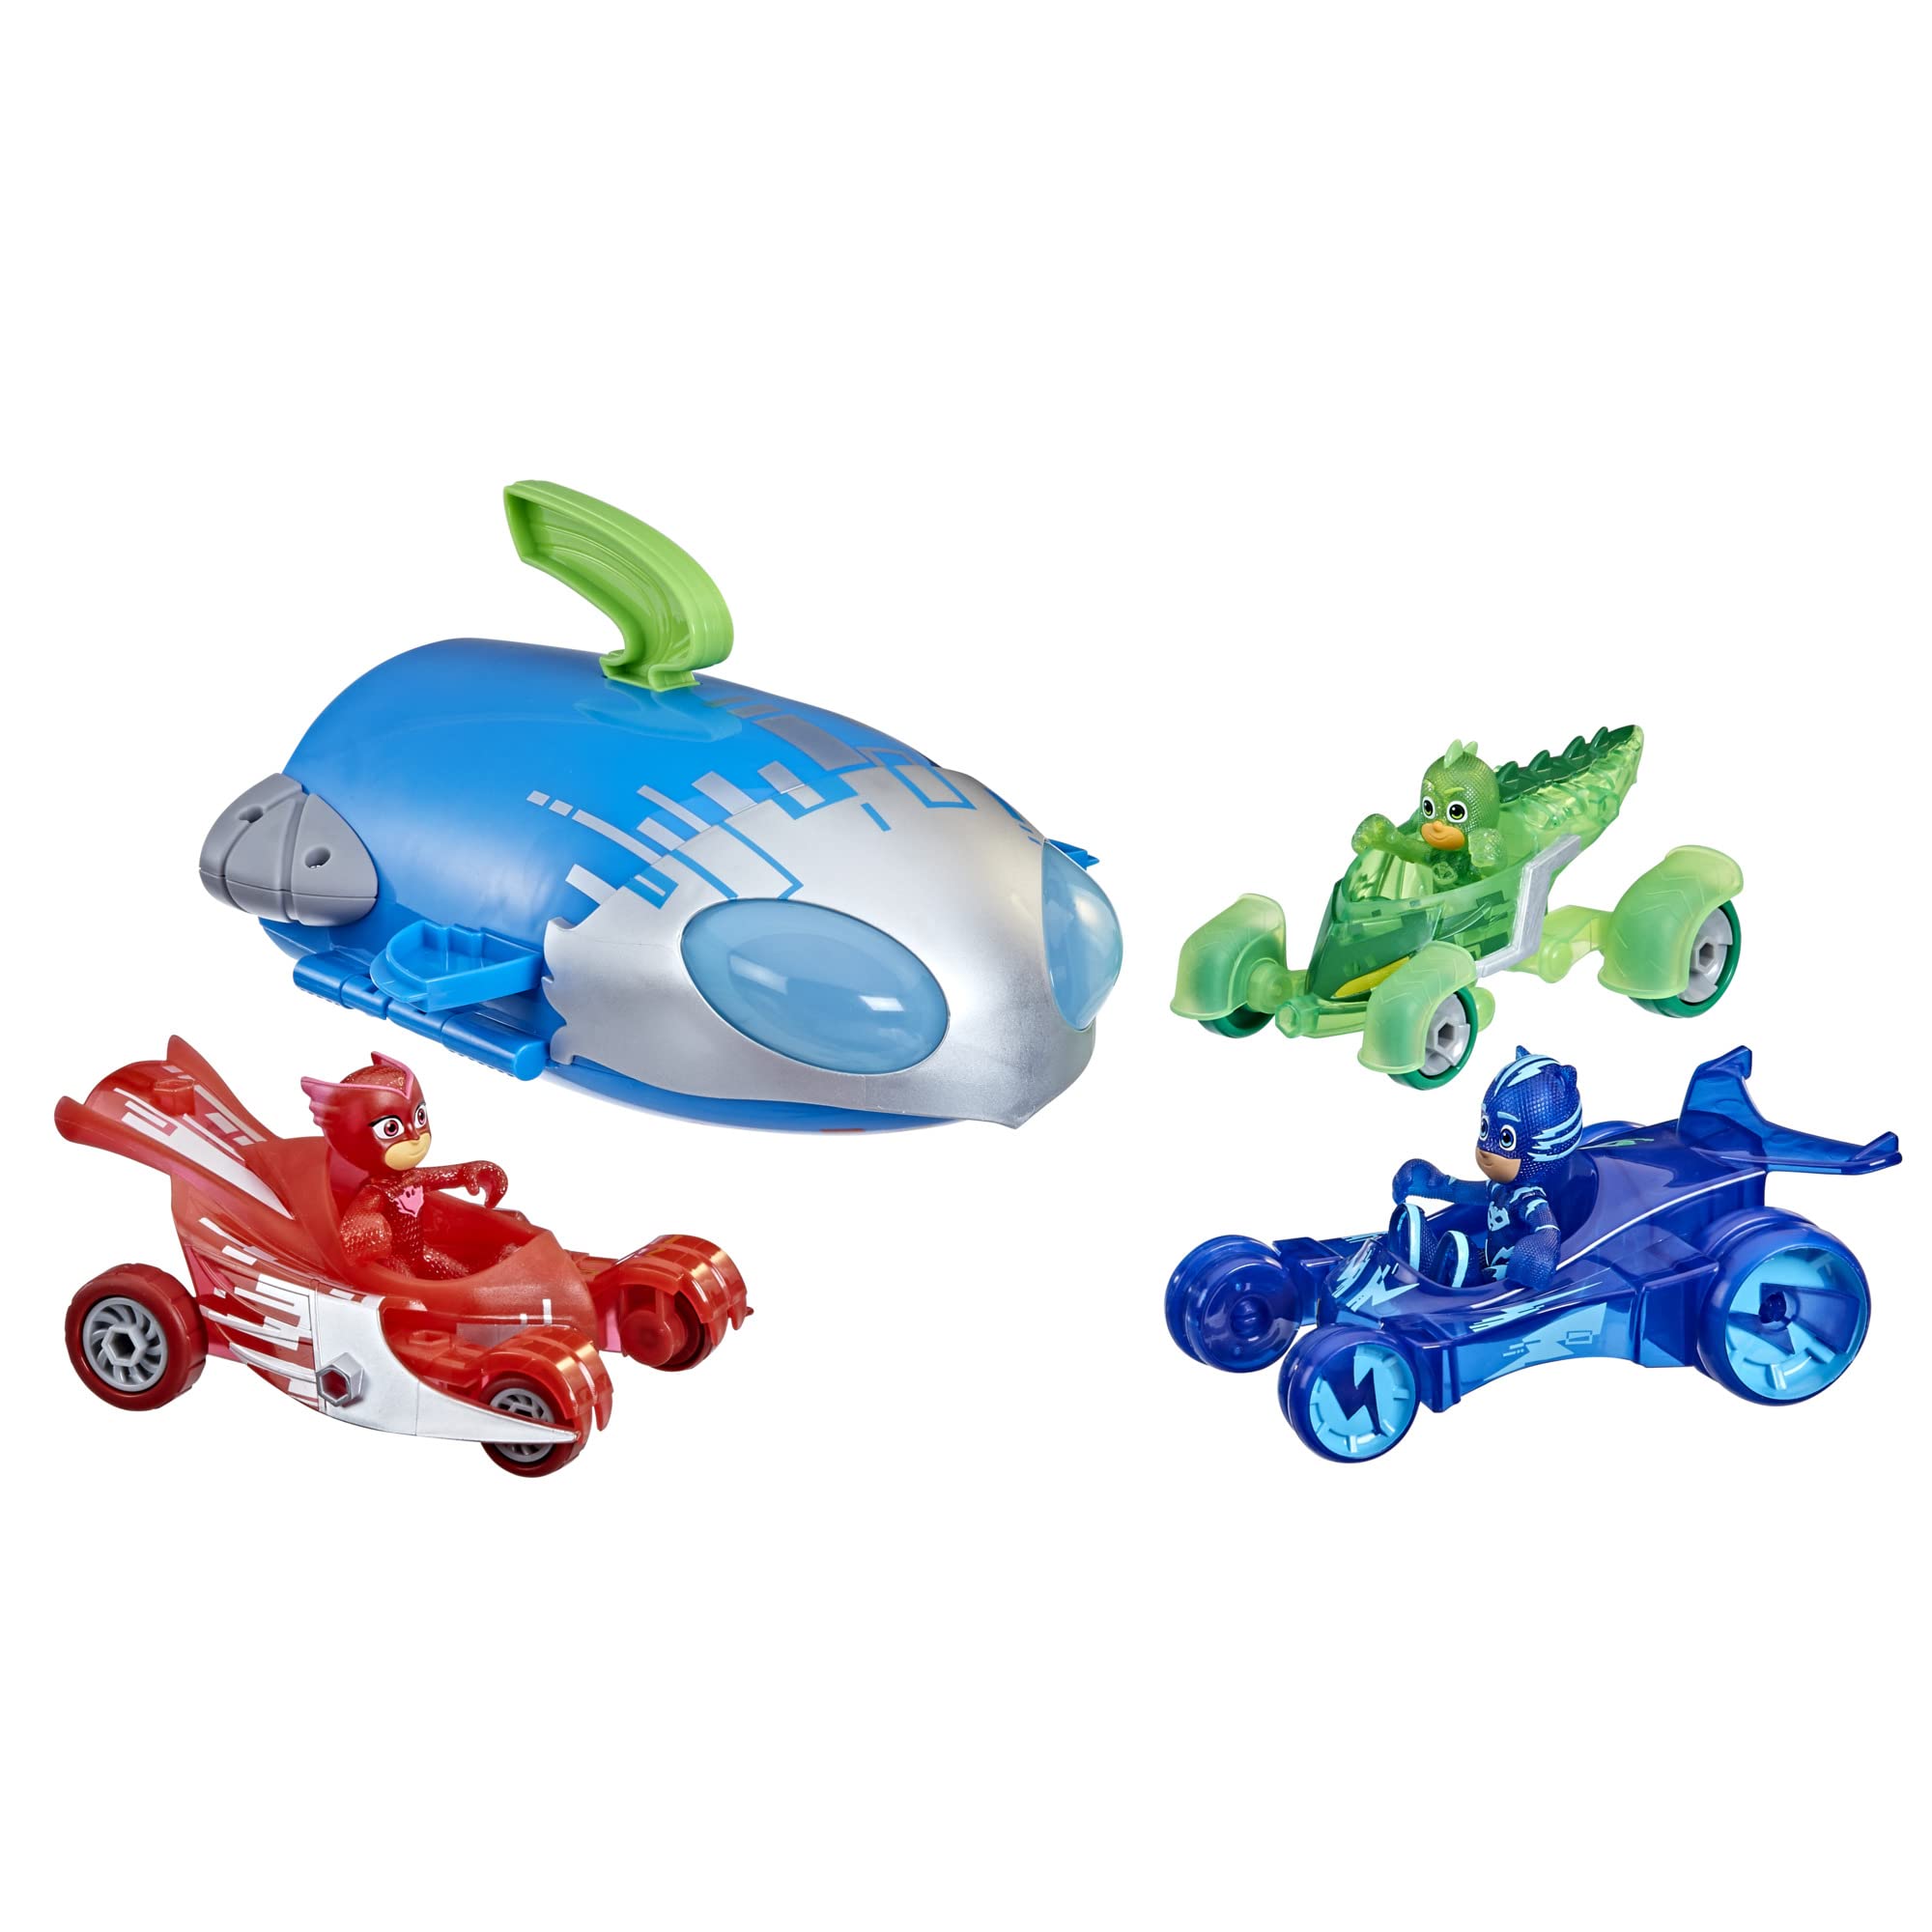 PJ Masks Hasbro PJ Ultimate Adventure Set Preschool Toy,Rocket HQ Playset with 3 Action Figures and 3 Vehicles,Age 3 and Up (Amazon Exclusive)